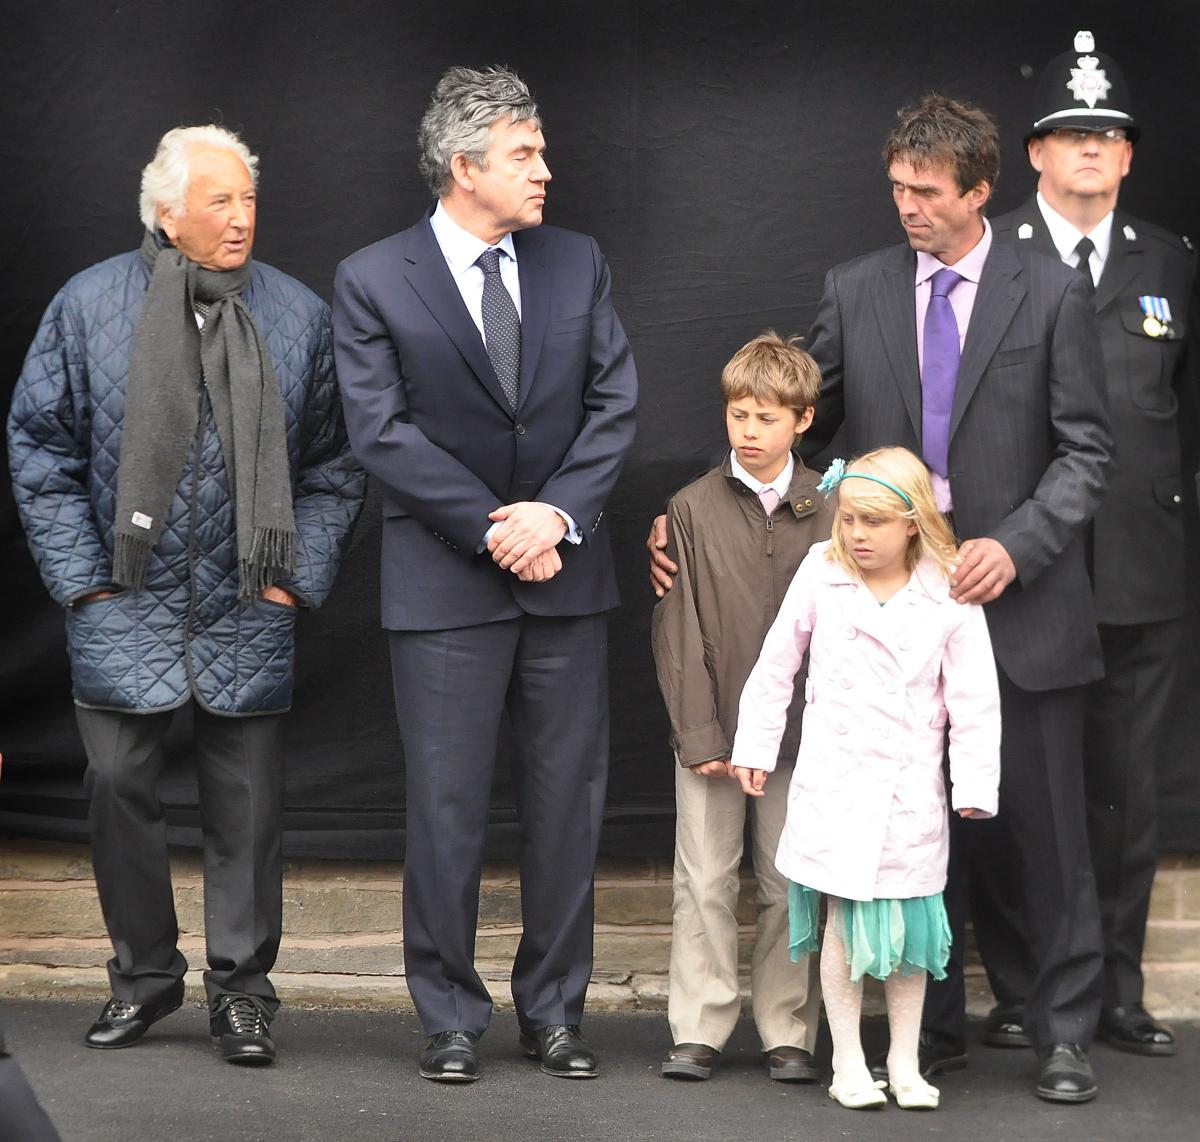 Prime Minister Gordon Brown and Michael winner with Paul Beshenivsky and his children Lydia and Paul.